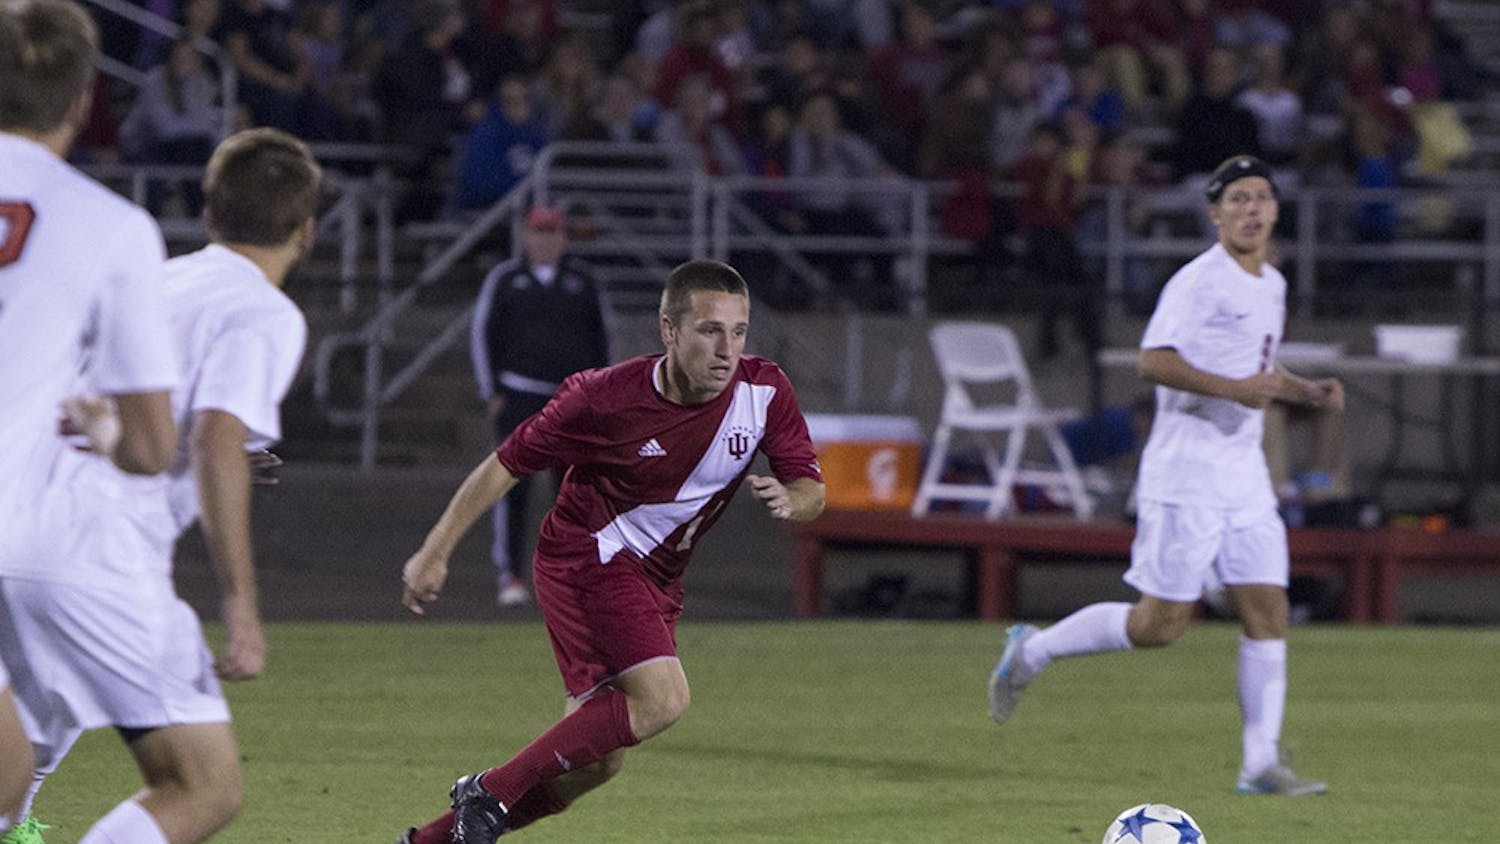 Junior midfielder Tanner Thompson moves to get a loose ball during the first half of the game against Ohio state on Oct. 10 at Bill Armstrong Stadium. The Hoosiers lost 1-0 in overtime.